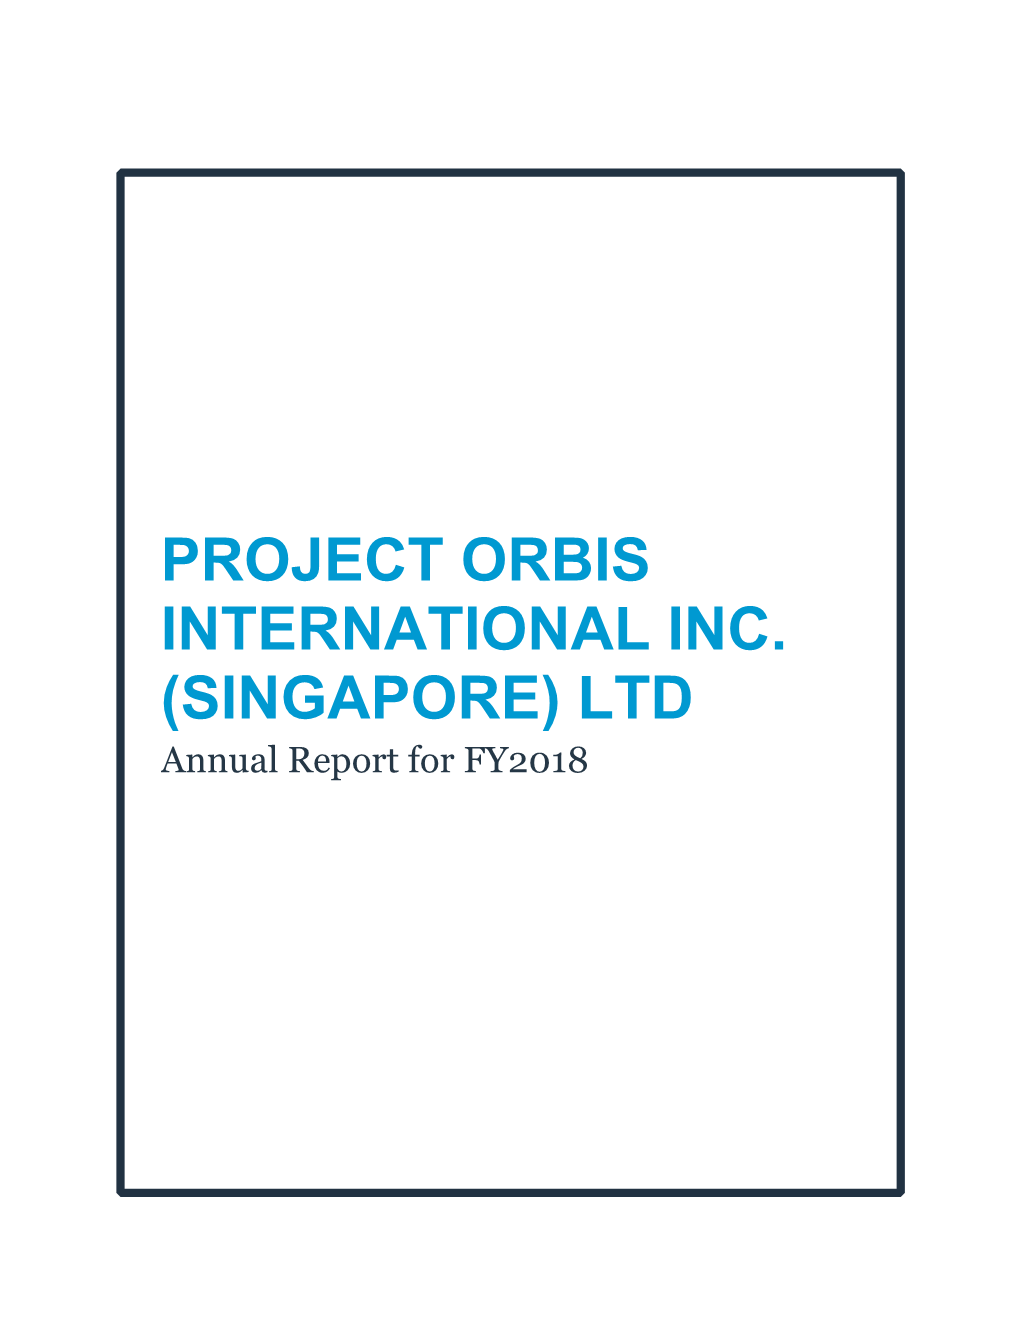 PROJECT ORBIS INTERNATIONAL INC. (SINGAPORE) LTD Annual Report for FY2018